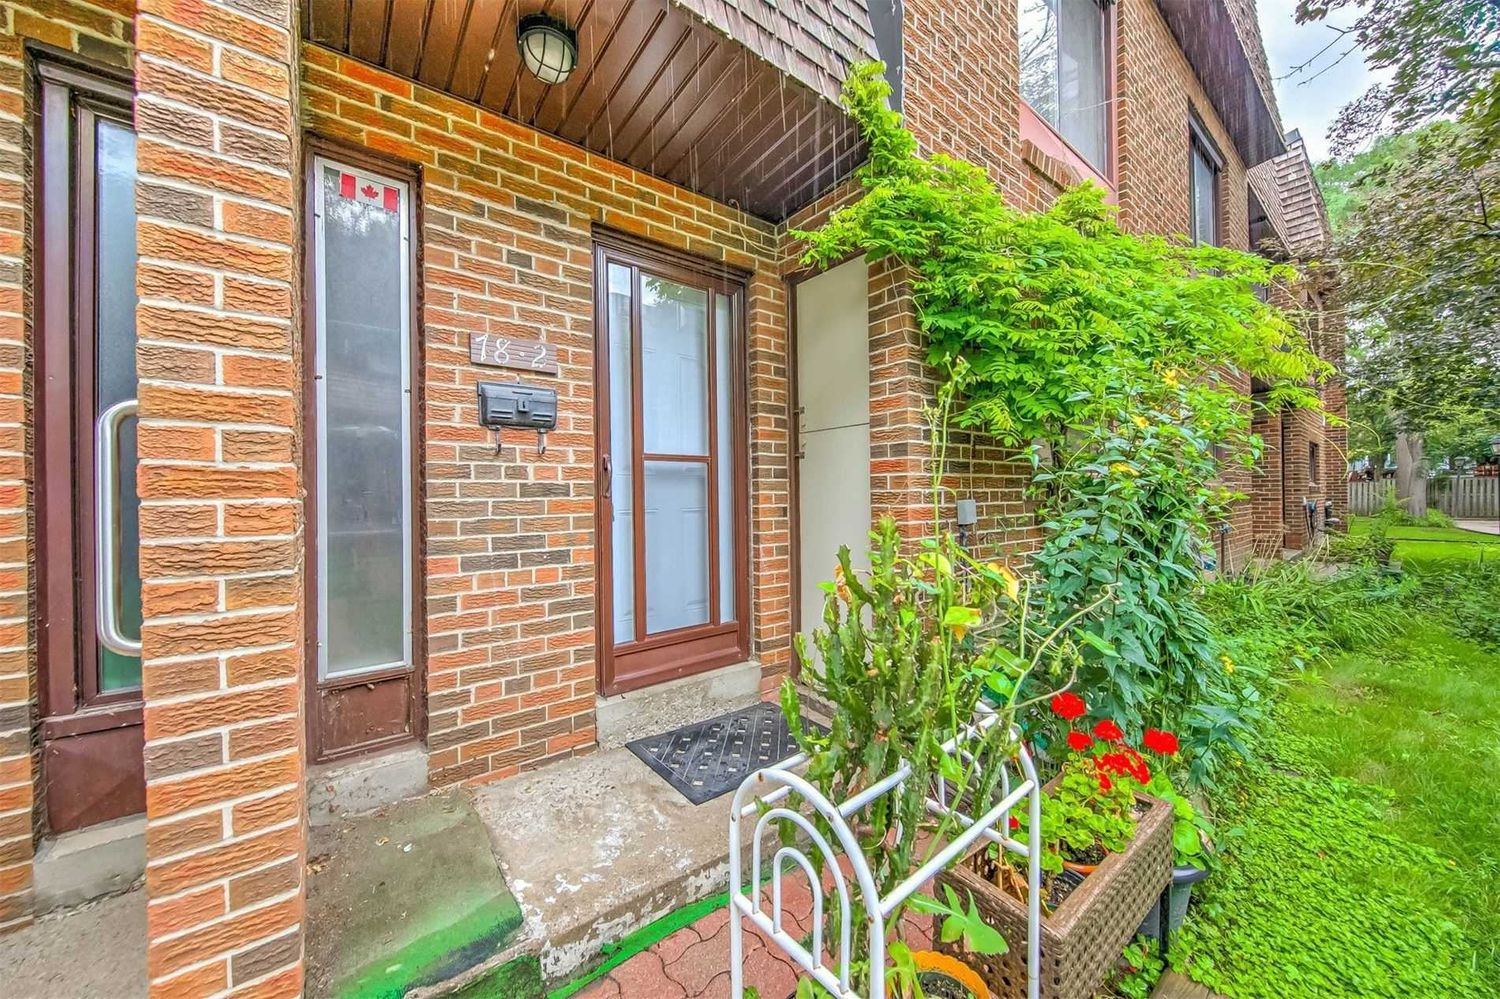 78 Castlebury Crescent. 78 Castlebury Townhouses is located in  North York, Toronto - image #2 of 2